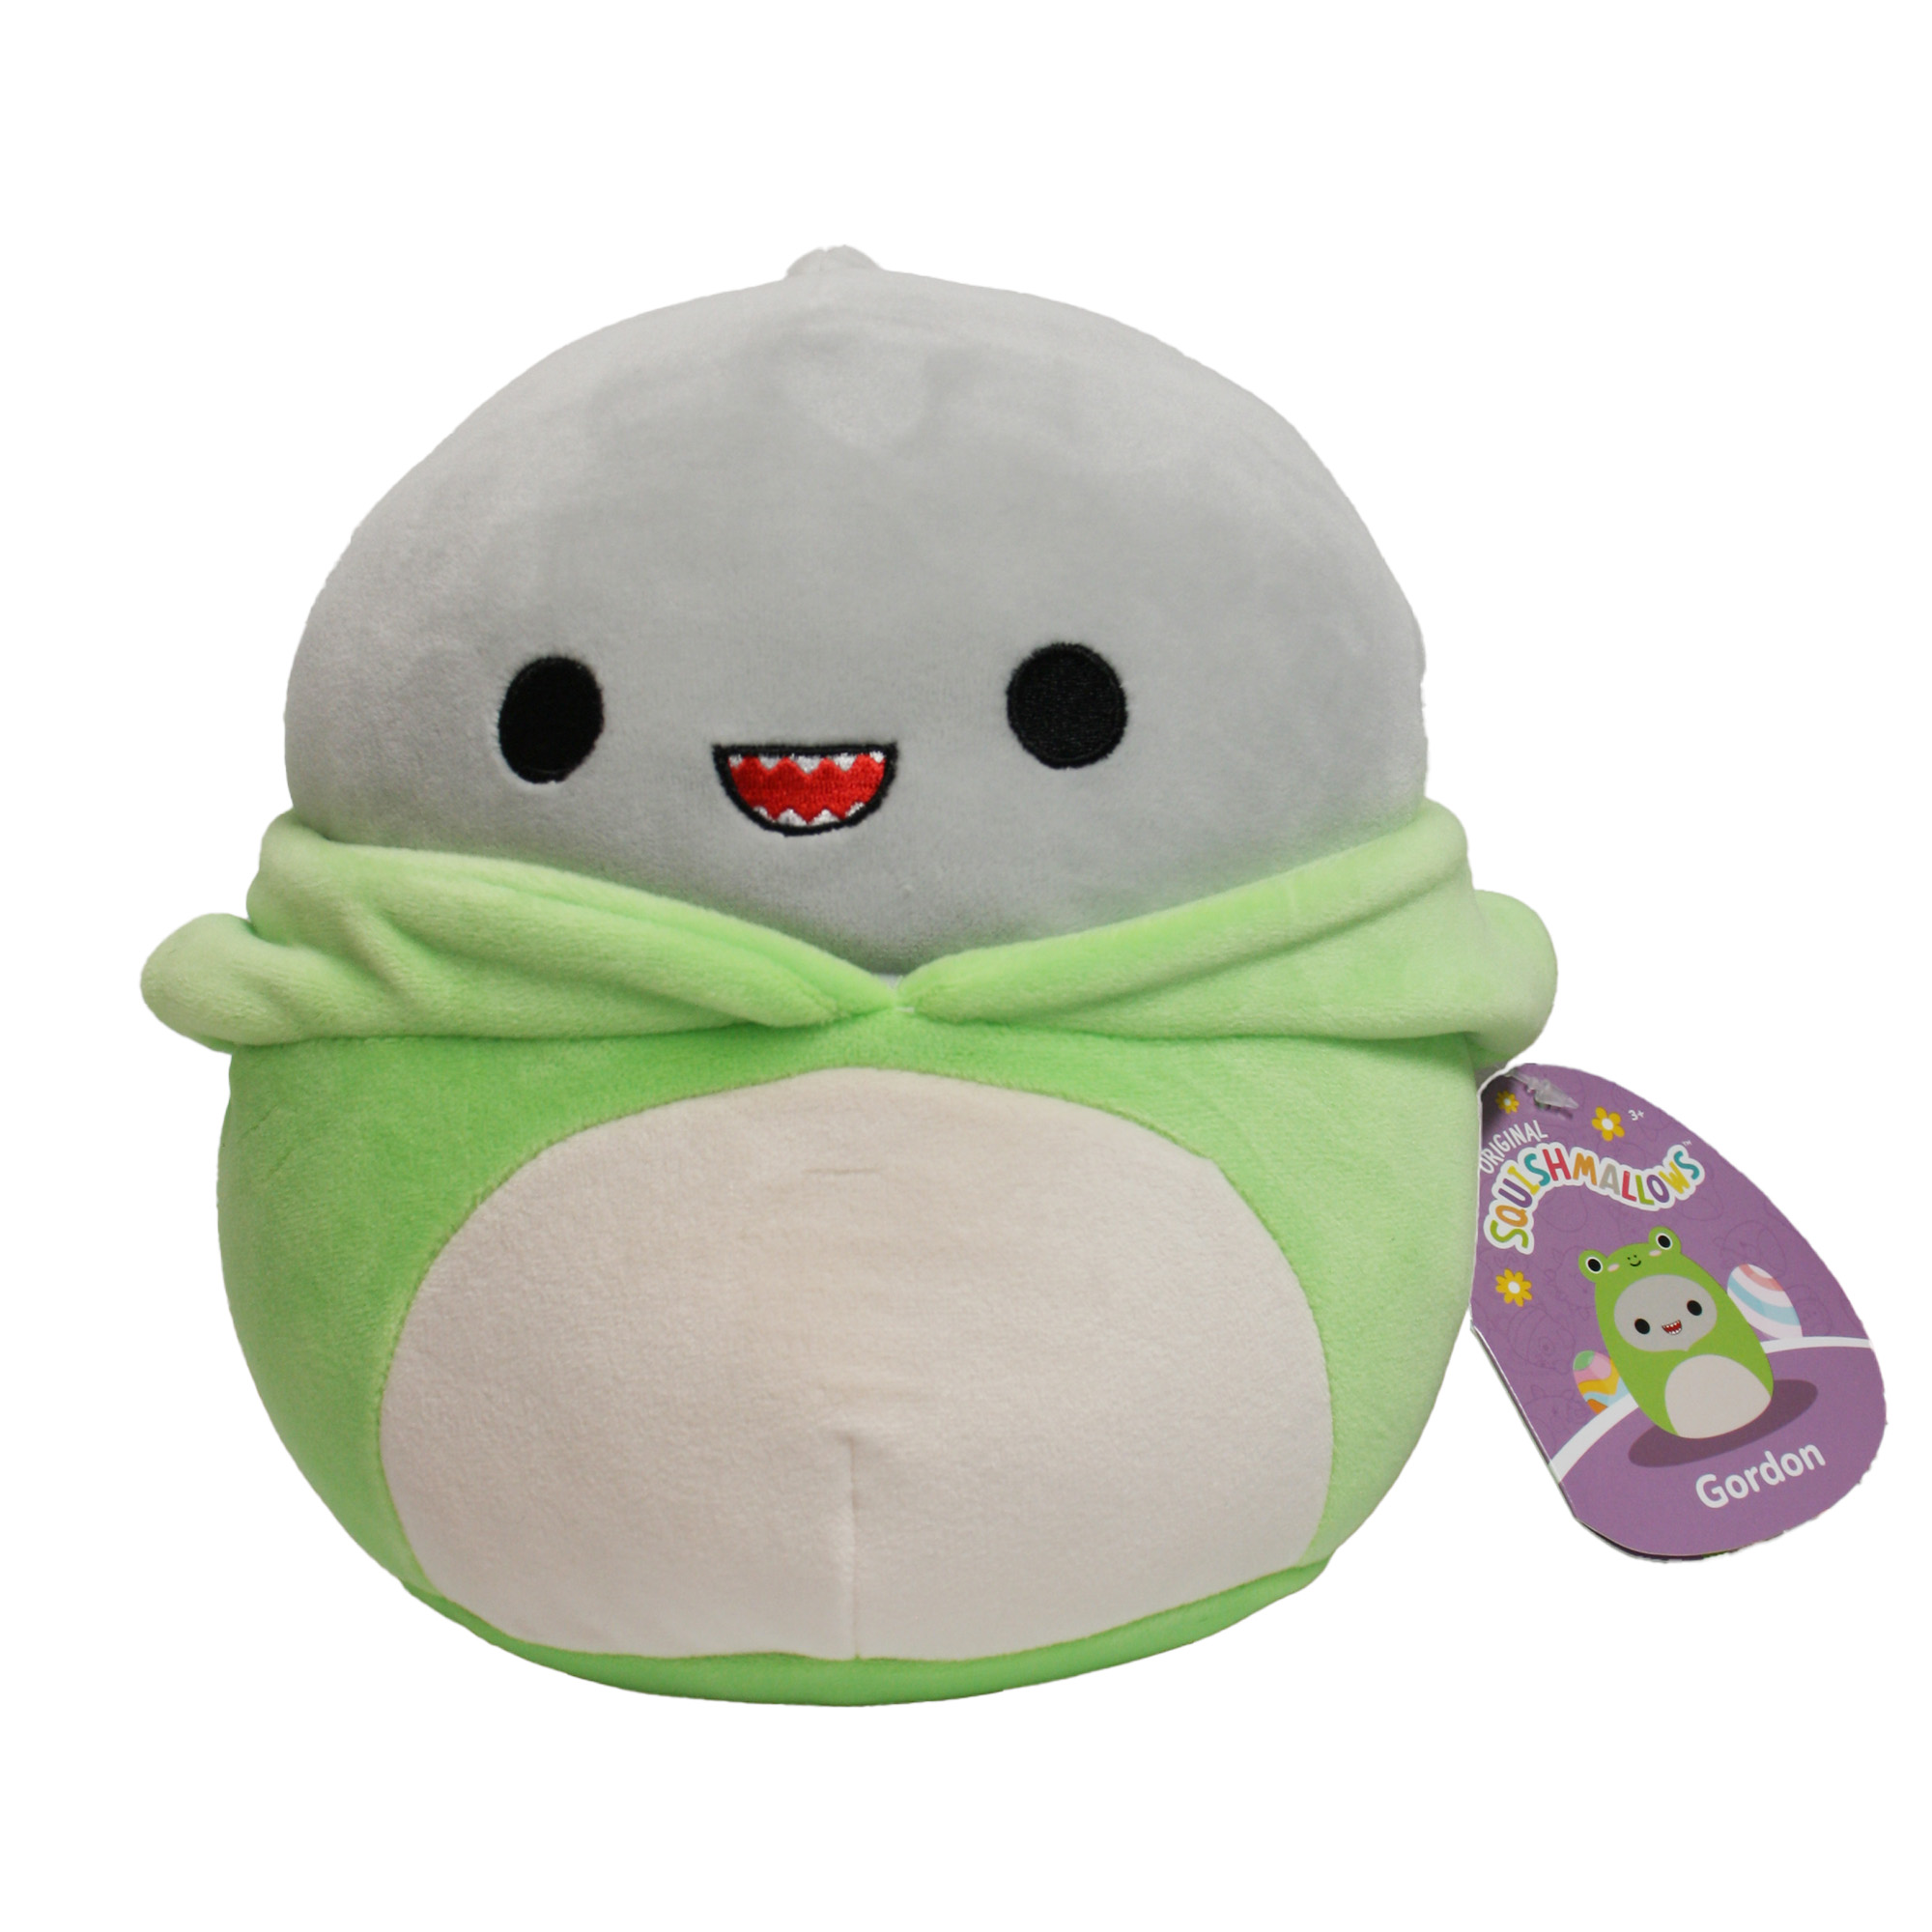 SQUISHMALLOWS - GORDON THE SHARK IN FROG COSTUME PLUSH (8) - EASTER SQUAD